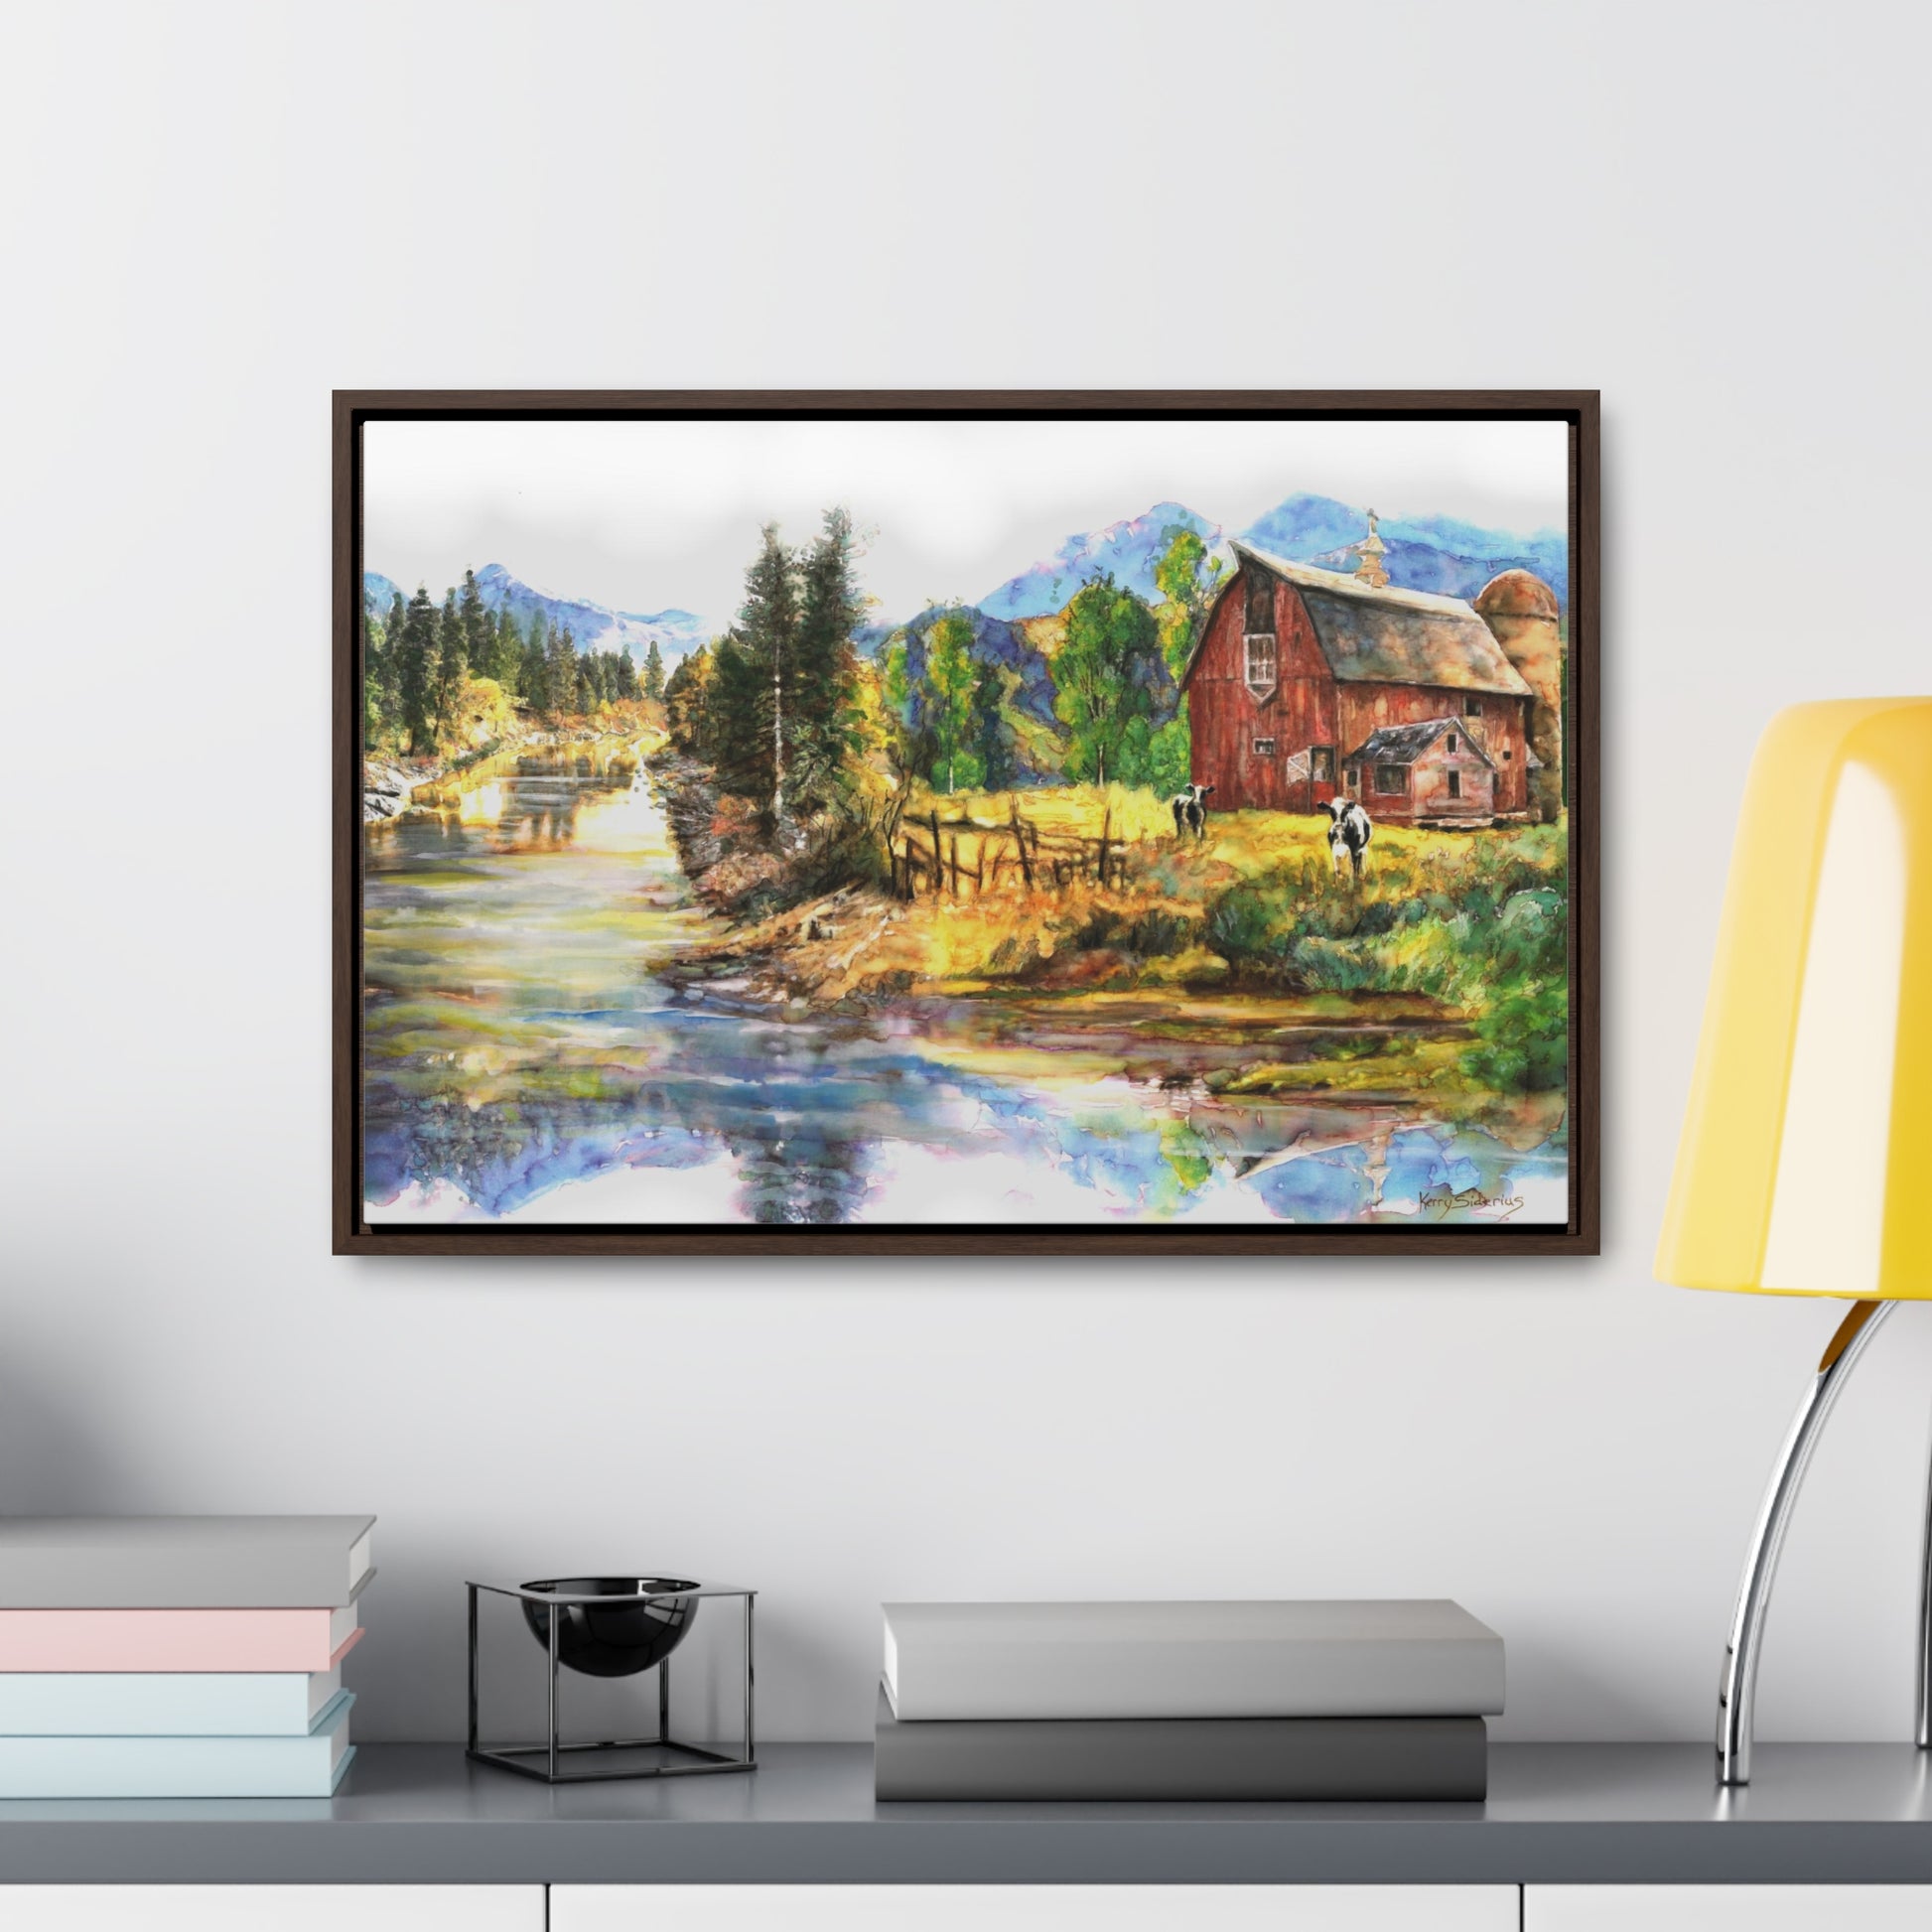 "Barn in Plain and the Wenatchee River" Gallery Wrapped Wood-Framed Canvas - Kerry Siderius Art 